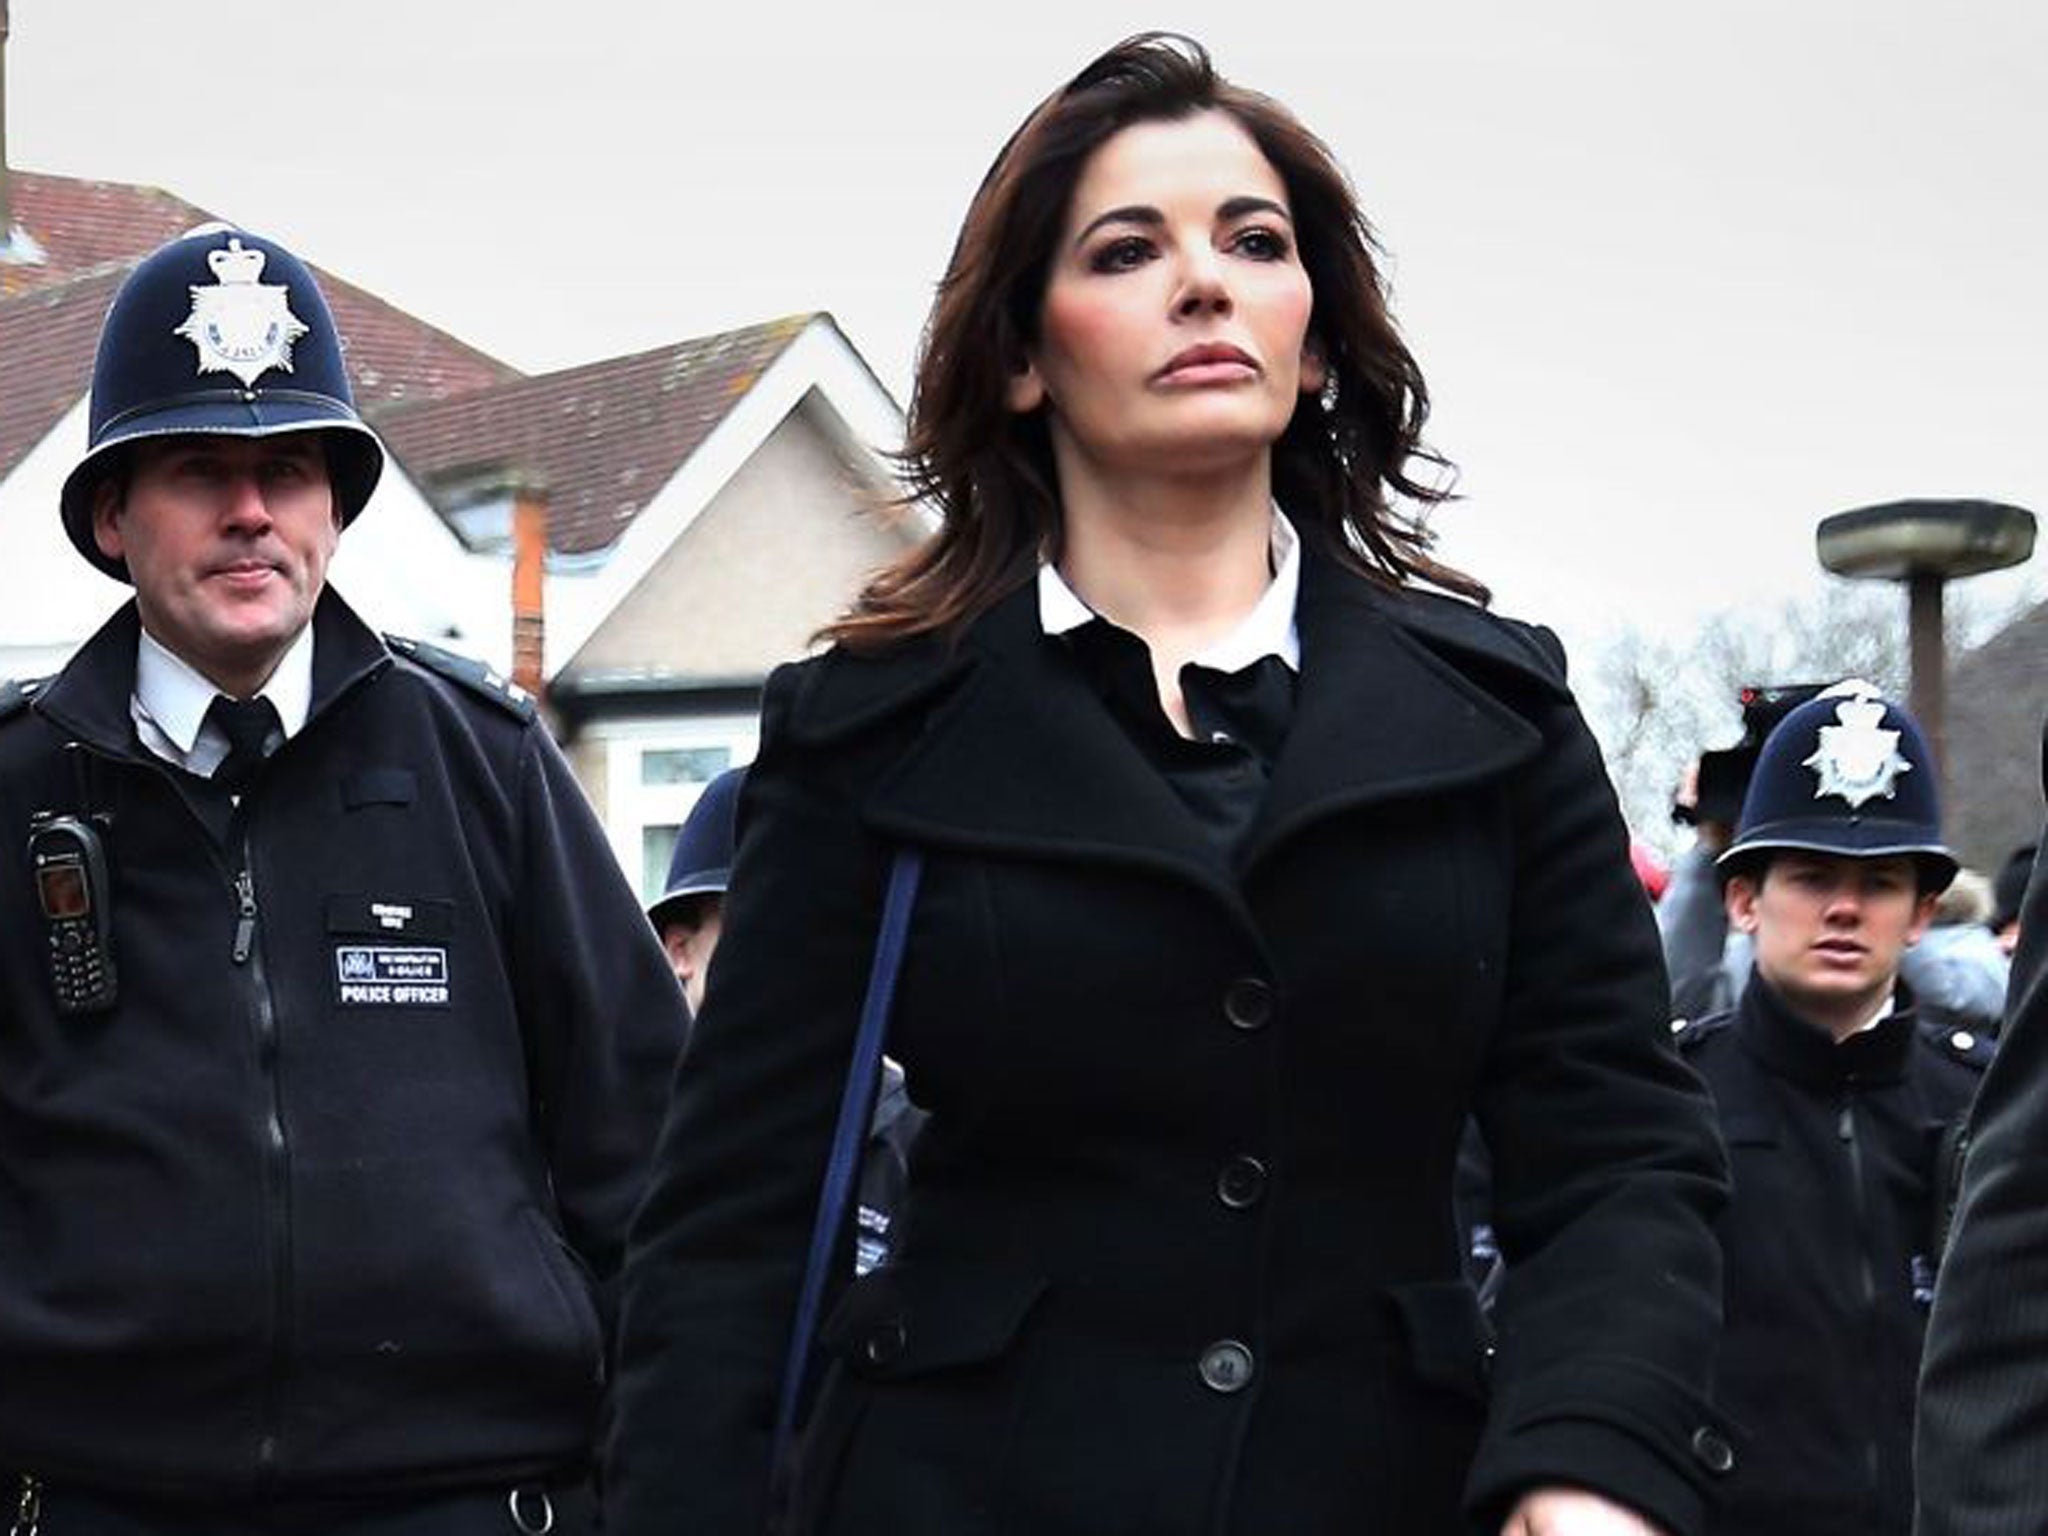 Nigella Lawson attending the trial of her former personal assistants last year.